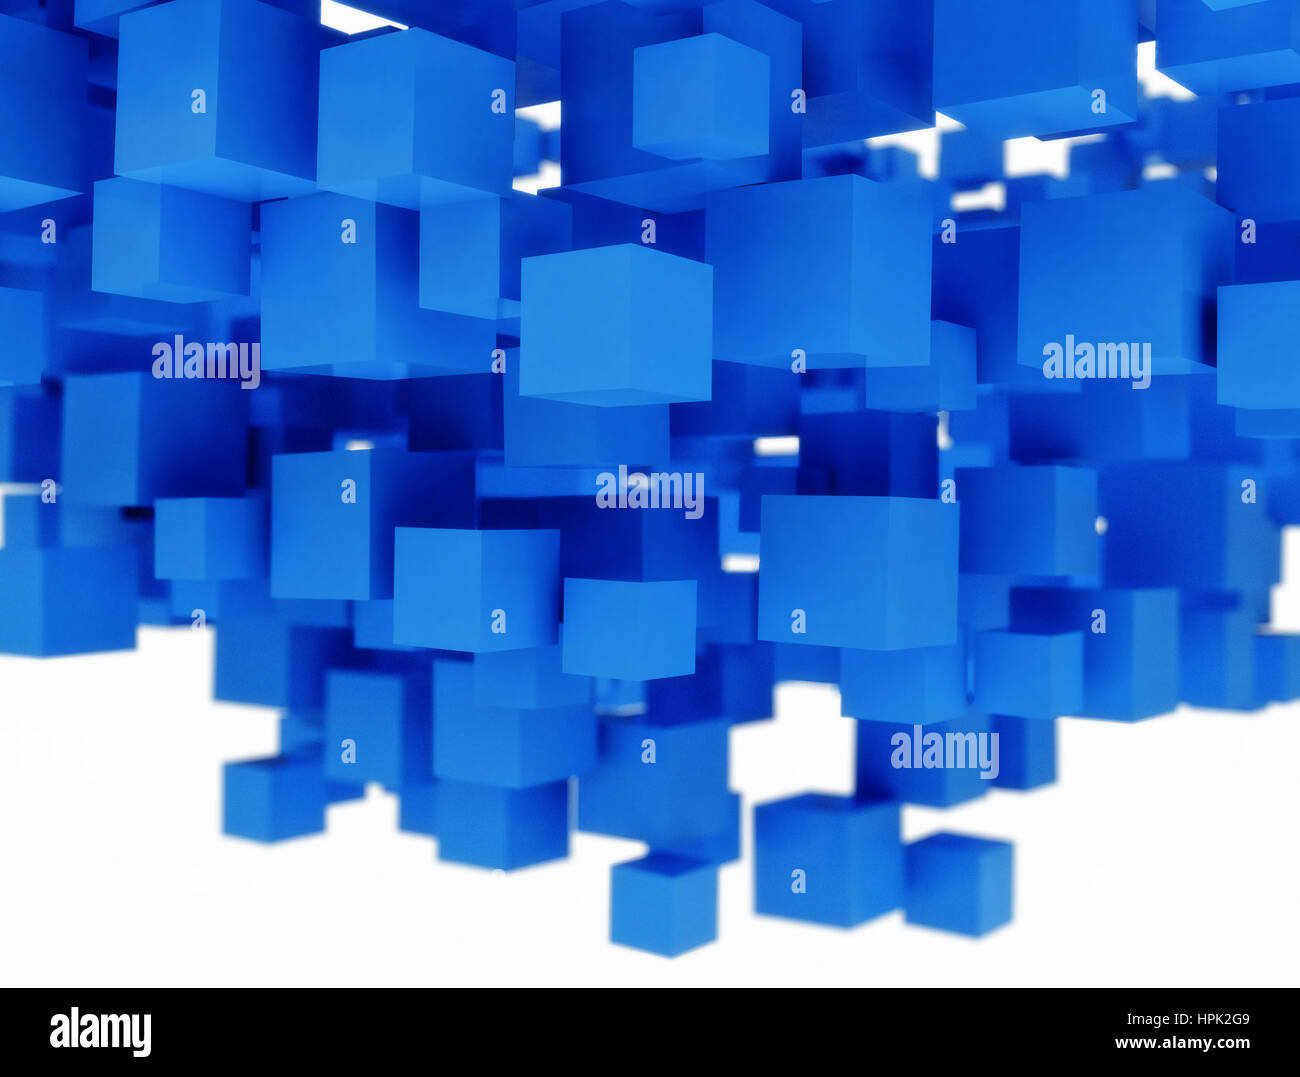 Abstract backgrounds pattern of 3D blue cubes Stock Photo